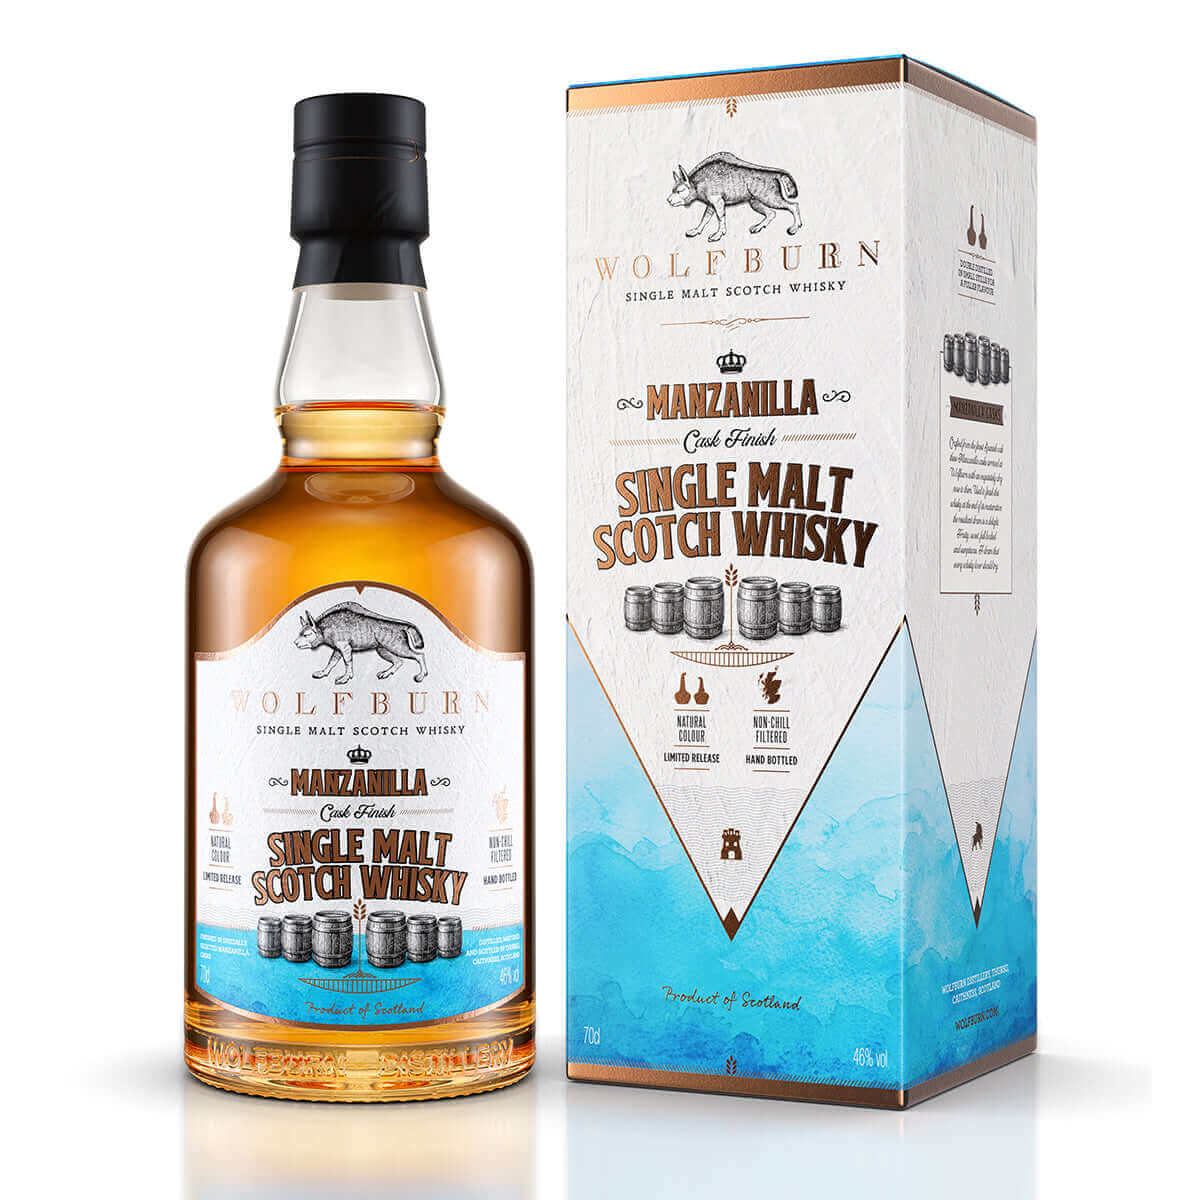 Wolfburn Distillery Wolfburn Morven – 46% vol. 70cl This lightly peated whisky is made from malted barley infused with smoke during the drying process. It’s a reflection of history – the original 19th Century distillery was largely fired by peat. Gentle d